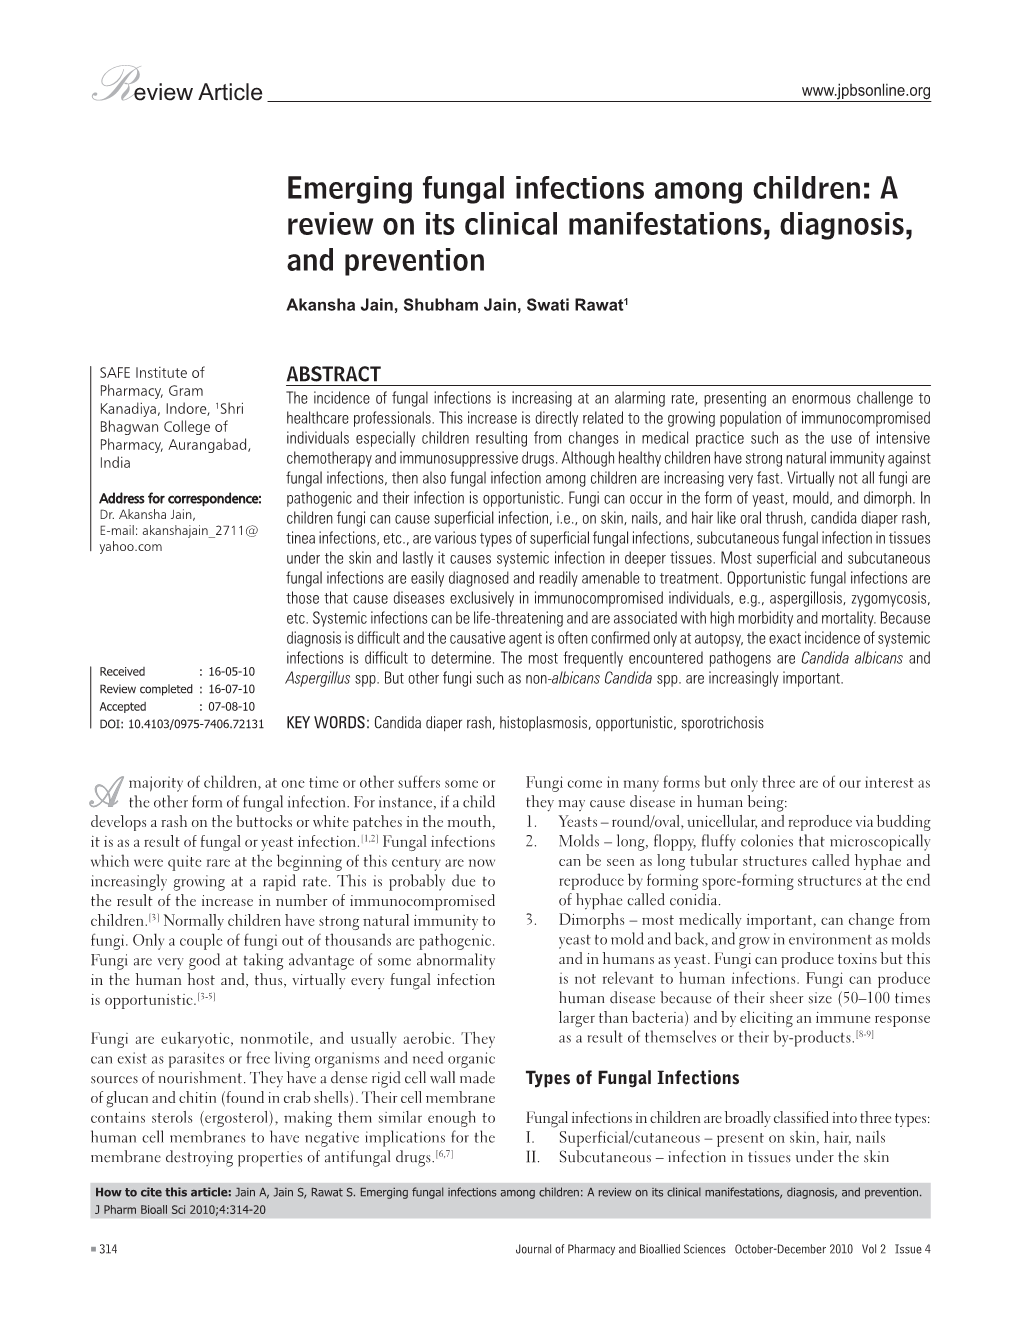 Emerging Fungal Infections Among Children: a Review on Its Clinical Manifestations, Diagnosis, and Prevention